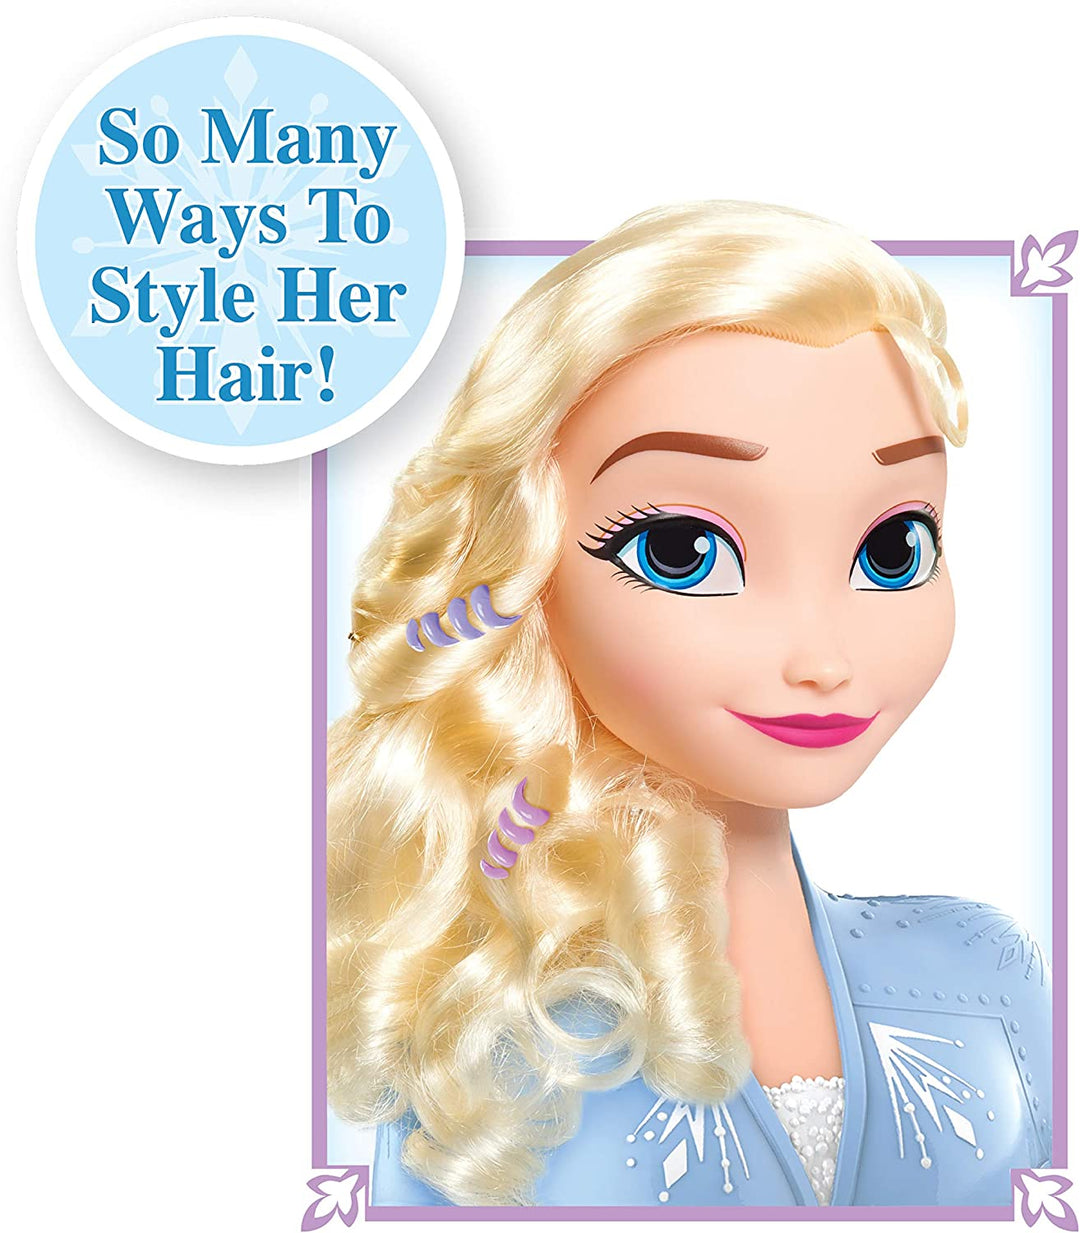 Just Play Frozen II 32806 Styling Head Elsa 20 cm with Accessories 13 Hair Accessories